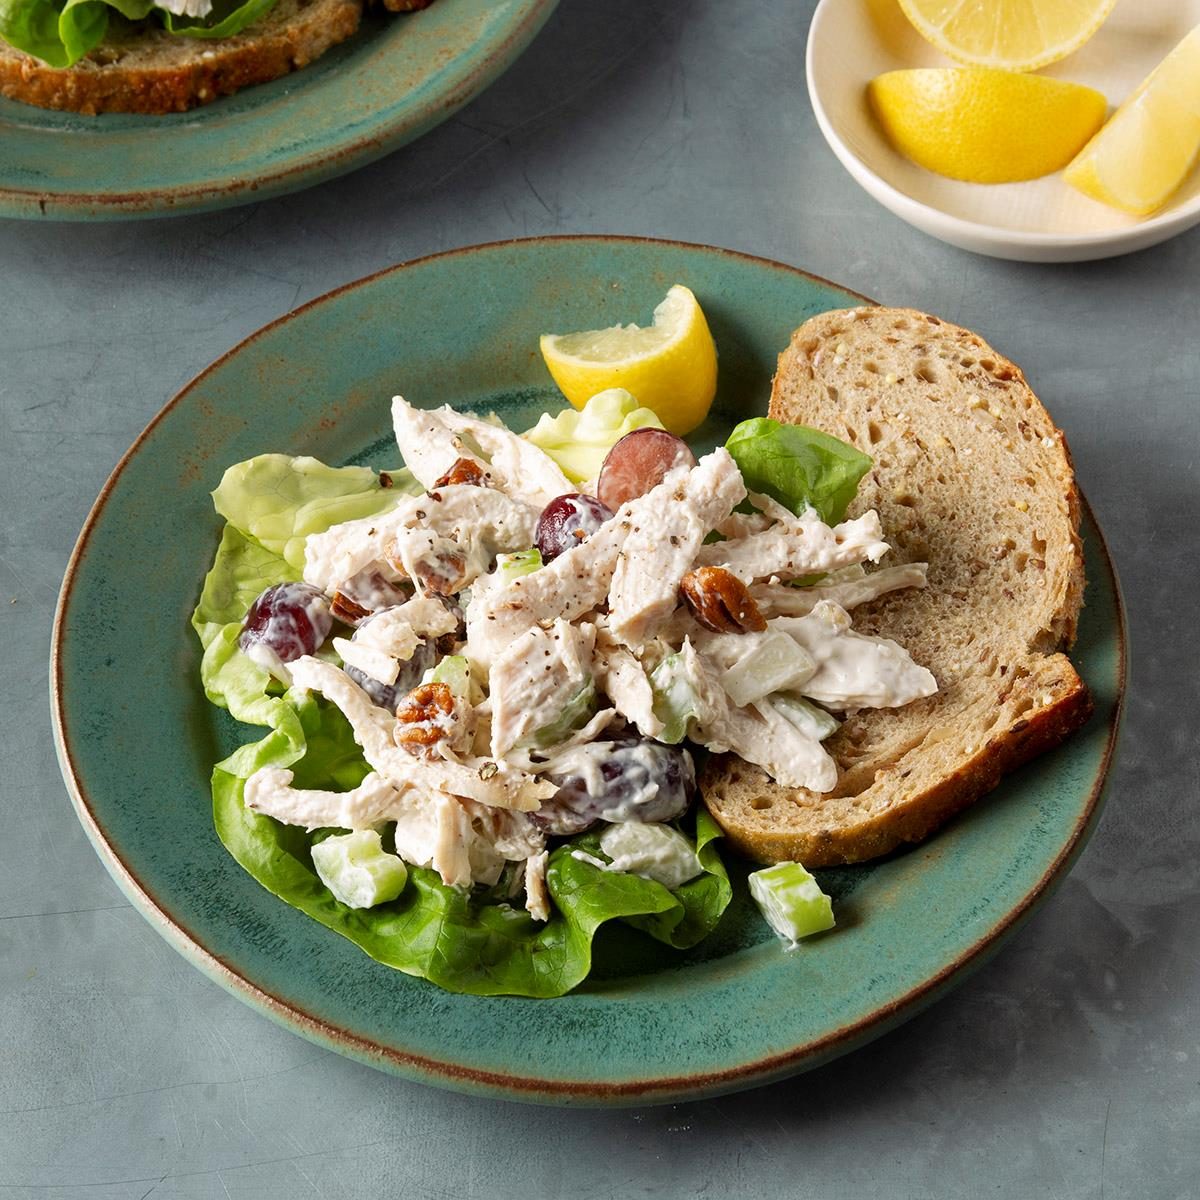 <p>This easy chicken salad recipe with grapes is ready in a snap when using rotisserie chicken and a few quick chops of pecans, sweet onion and celery. —Julie Sterchi, Jackson, Missouri</p> <div class="listicle-page__buttons"> <div class="listicle-page__cta-button"><a href='https://www.tasteofhome.com/article/easy-chicken-salad/'>Go to Recipe</a></div> </div> <p>Find more inspiration with these <a href="https://www.tasteofhome.com/collection/cold-lunch-ideas/">cold lunch ideas</a>.</p>